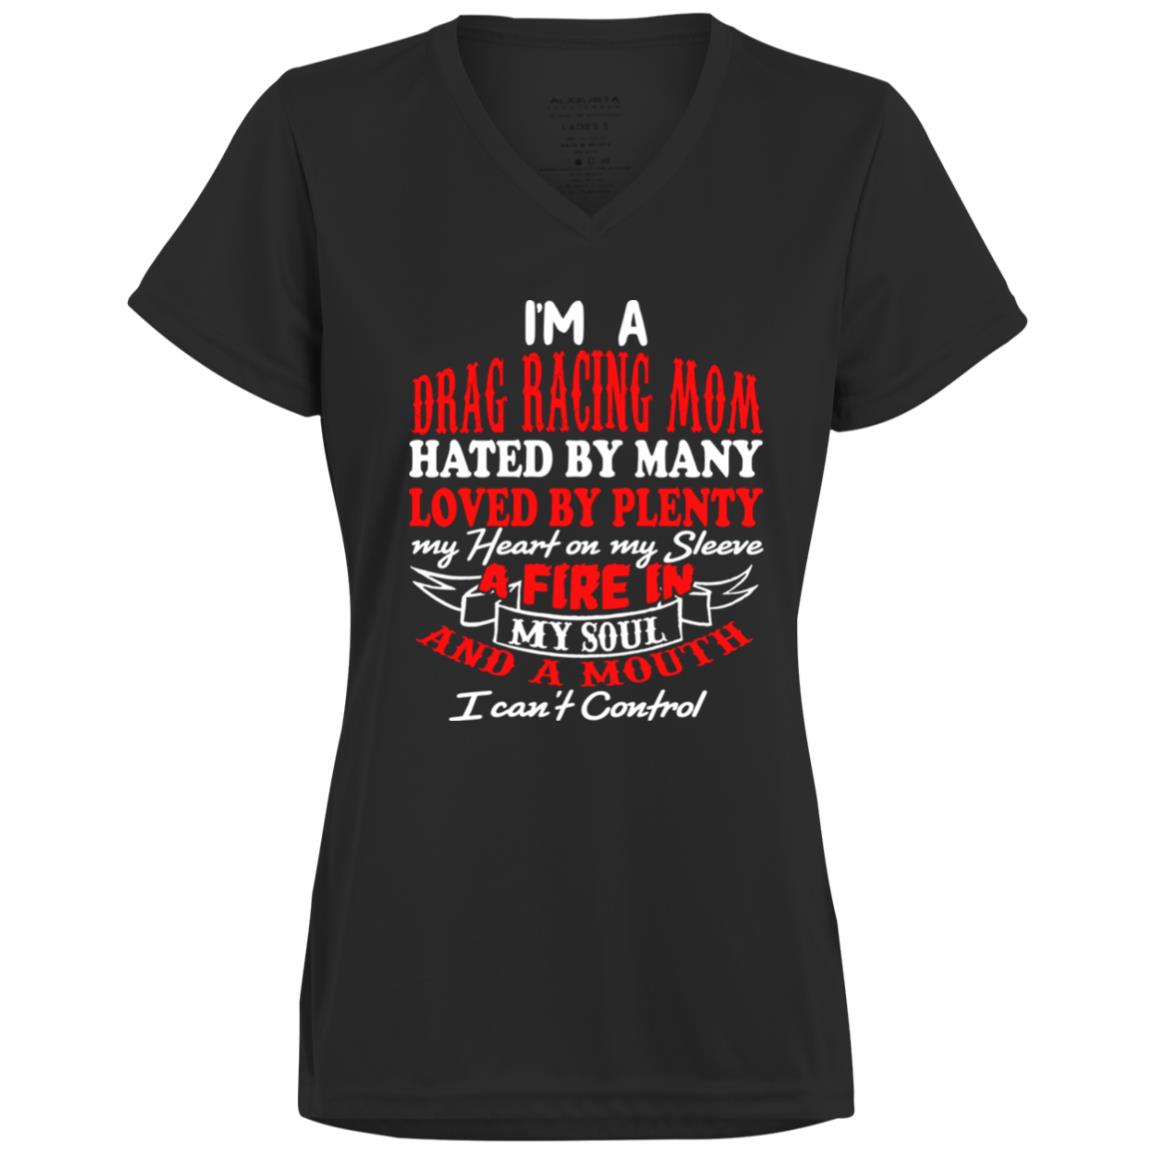 I'm A Drag Racing Mom Hated By Many Loved By Plenty Ladies’ Moisture-Wicking V-Neck Tee